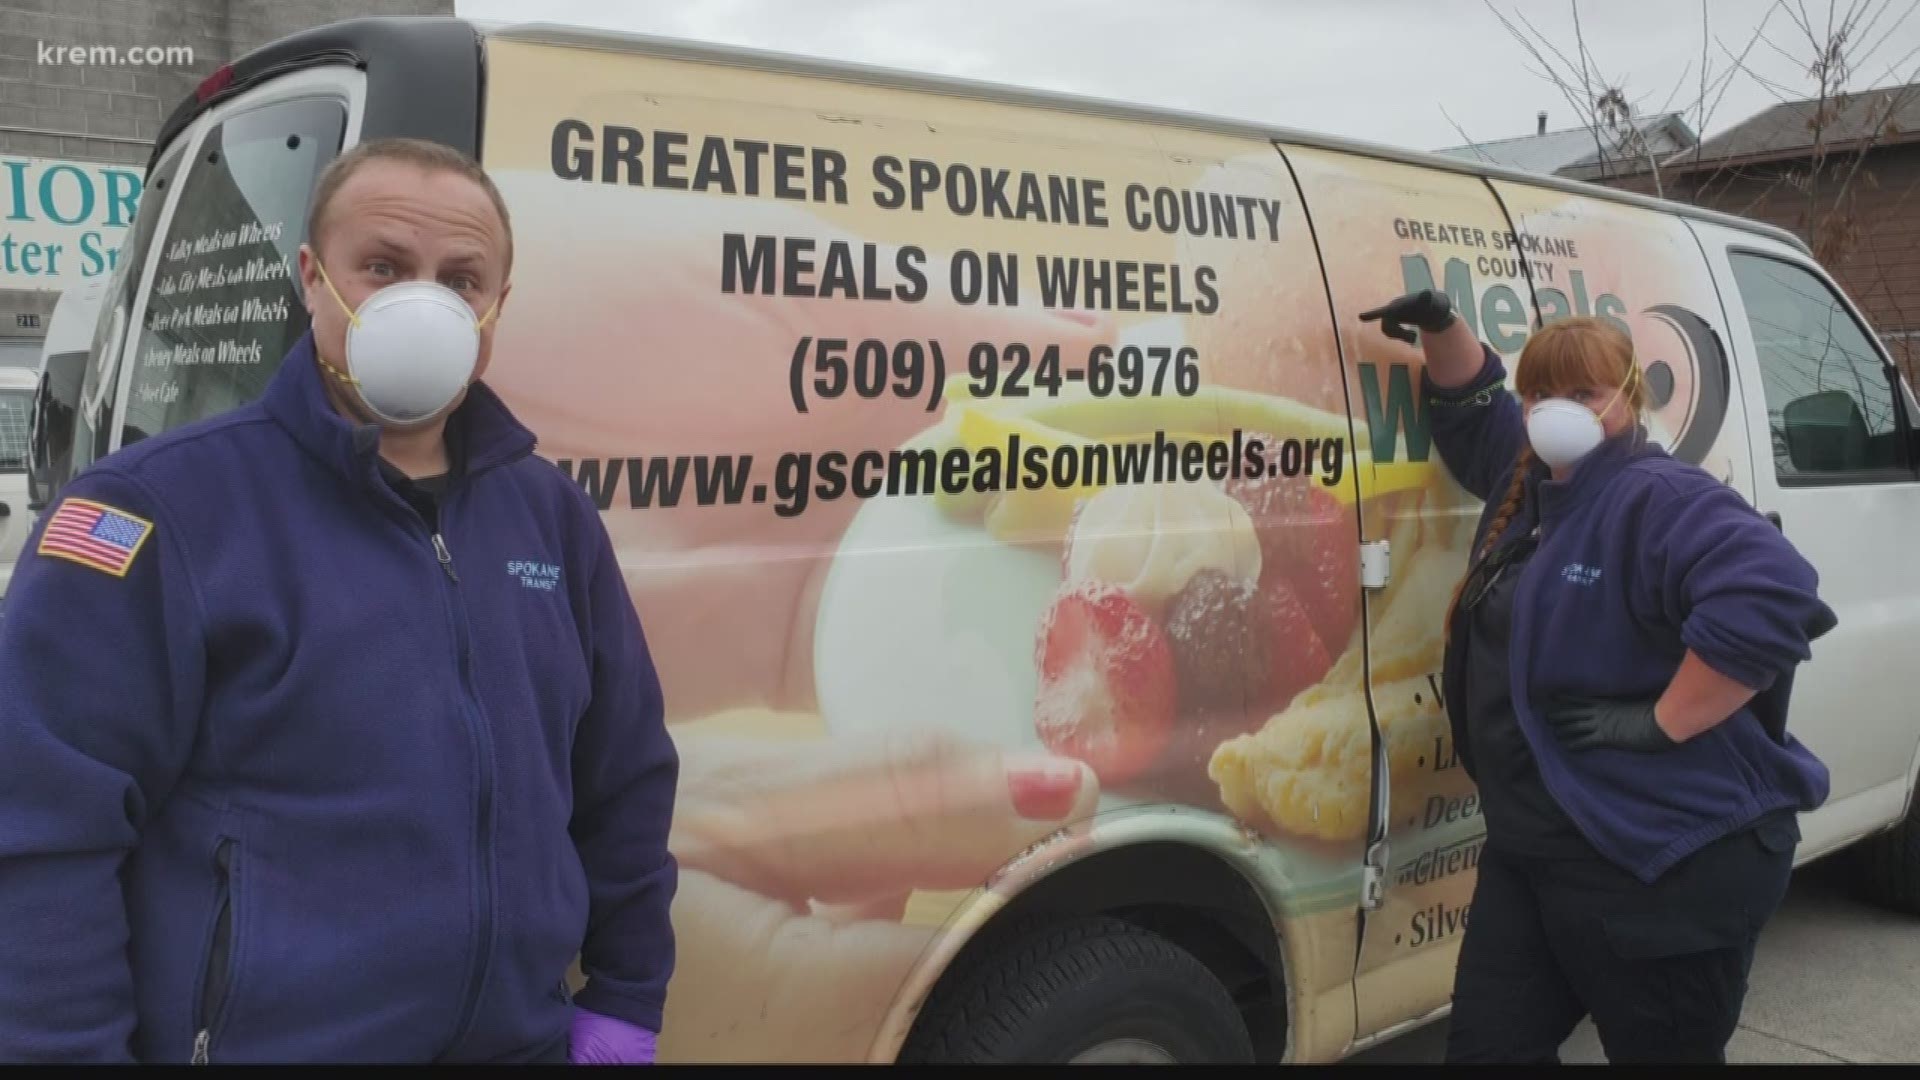 About 30 drivers with the Spokane Transit Authority are partnering with Meals on Wheels to distribute meals to seniors.